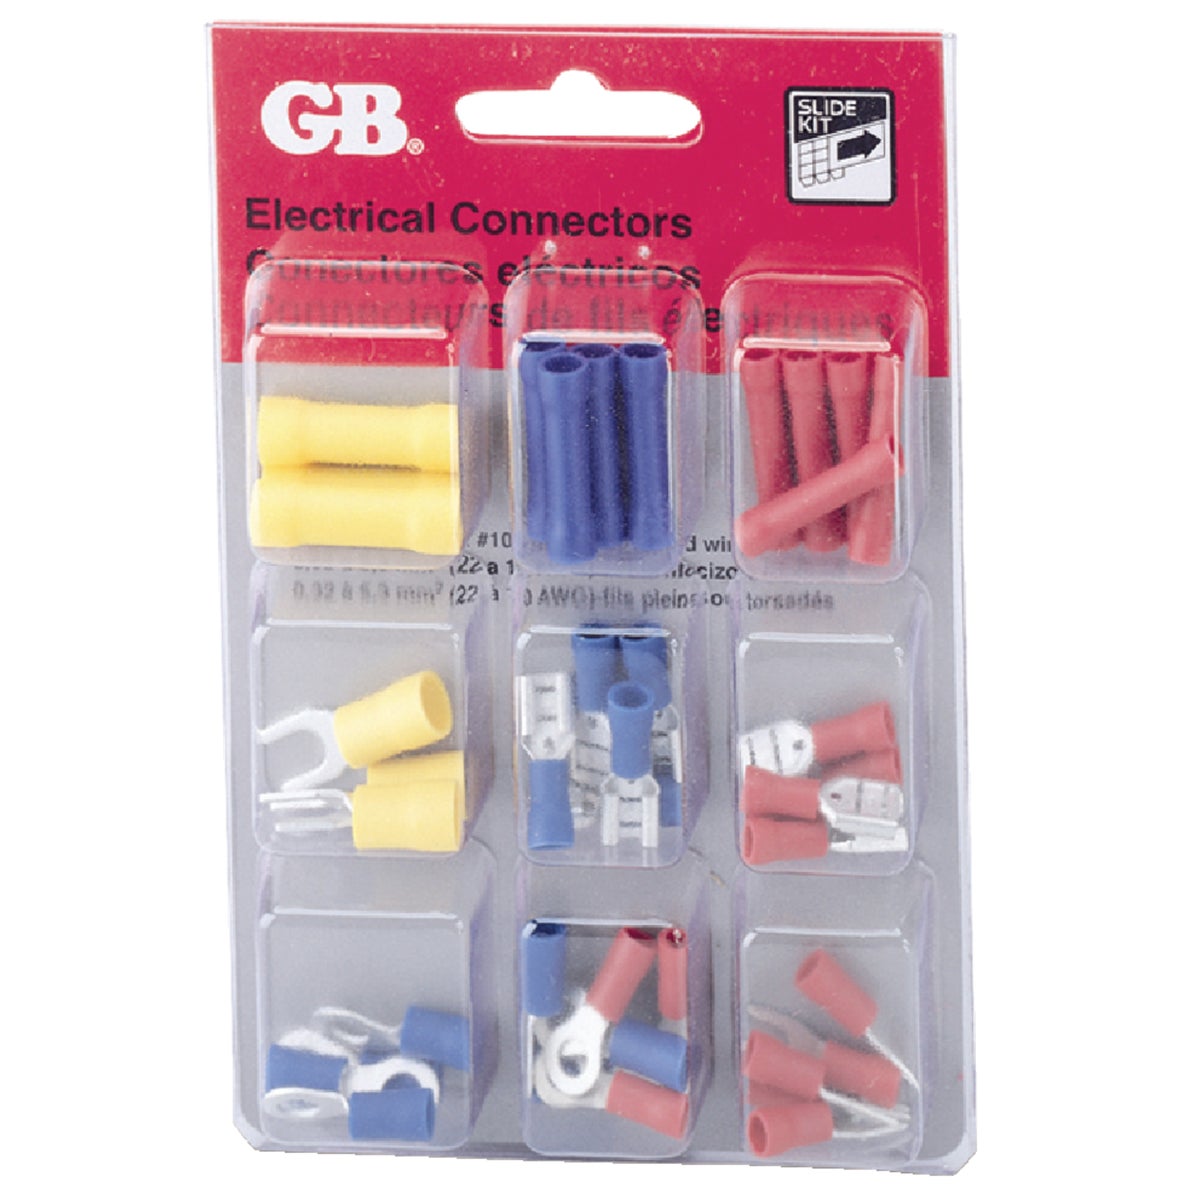 Item 514045, Termination made easy with this assortment pack of butt splices, Female 